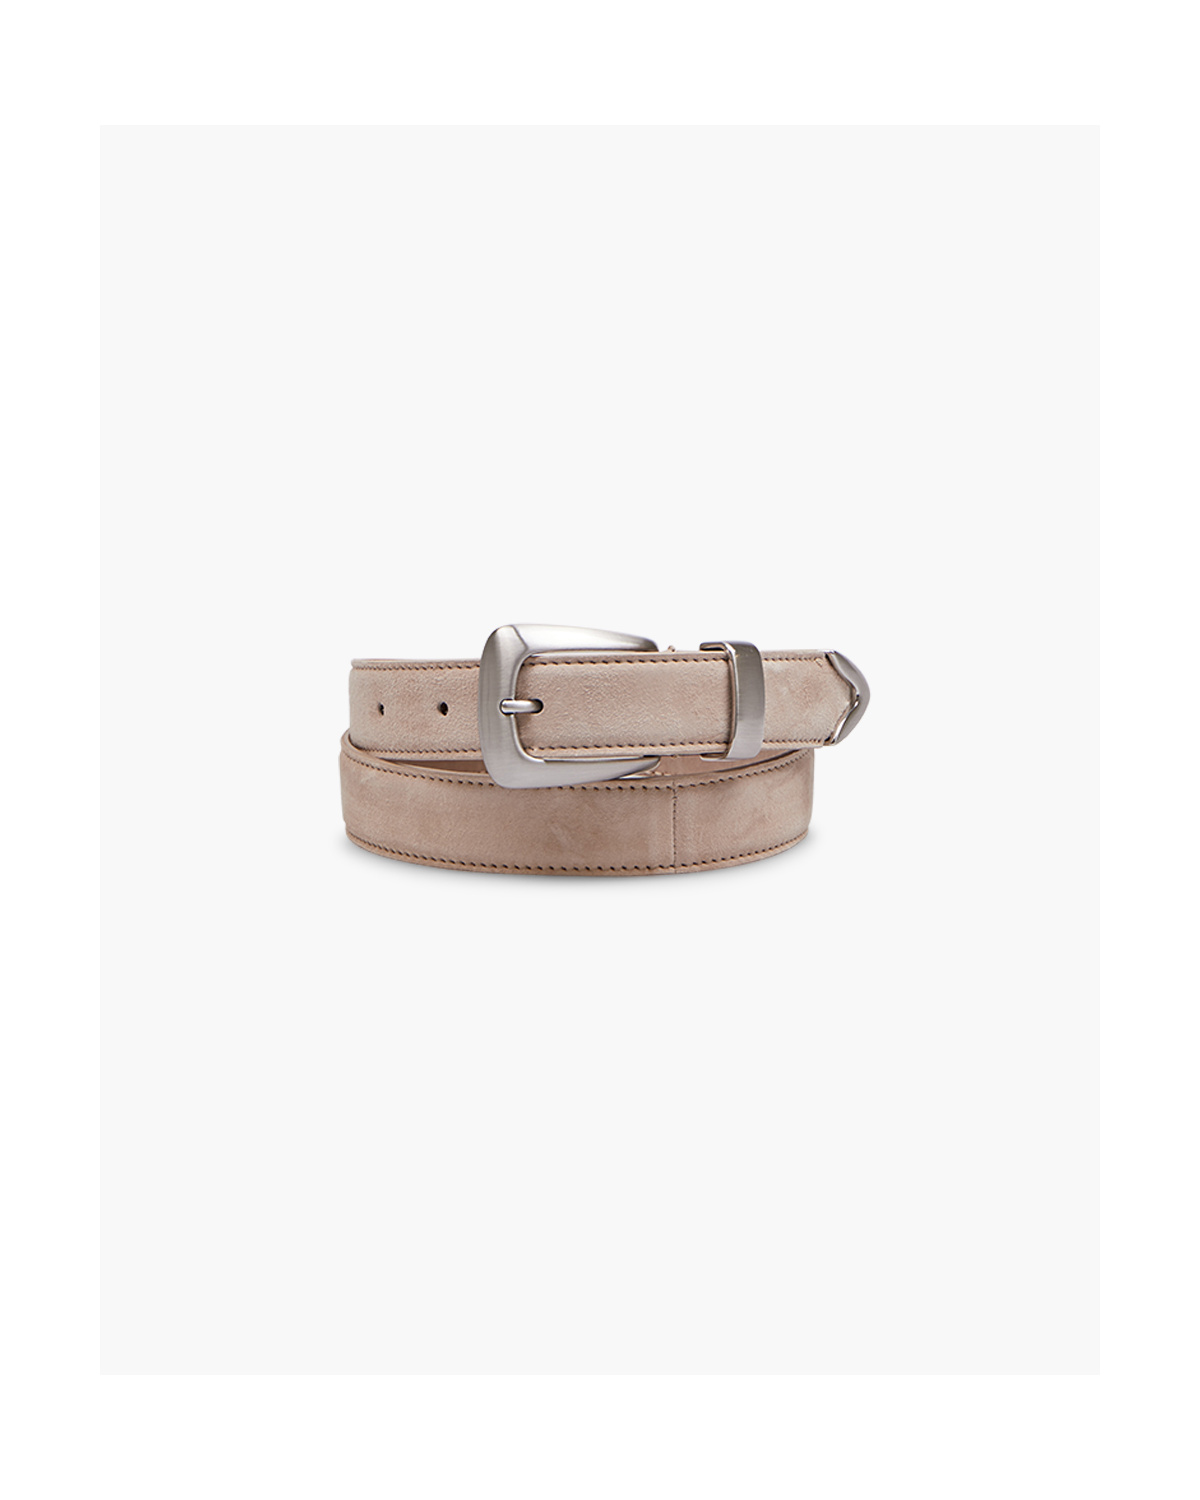 SUEDE BENNY BELT WITH SILVER BUCKLE